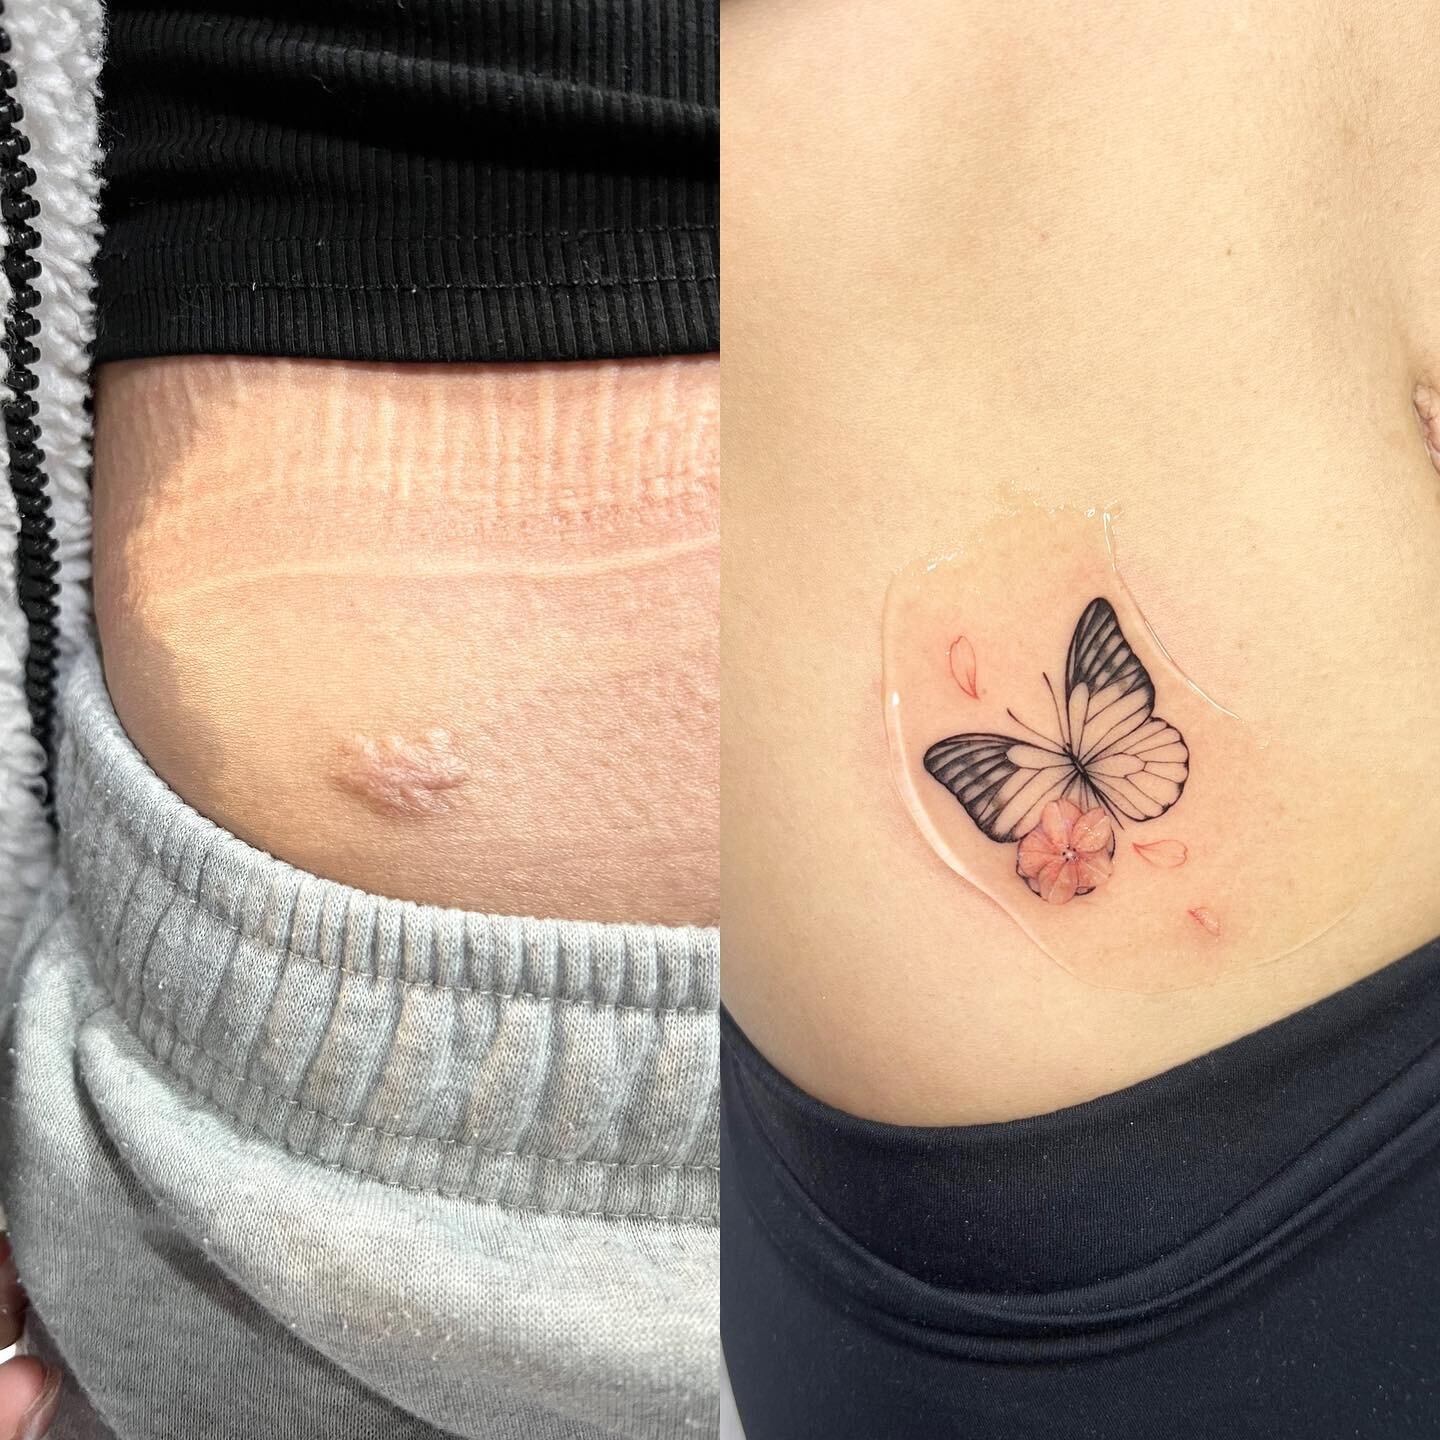 Surgery scar cover up done by @jingstattoo 
#scarcoverup #rosetattoo #flowertattoo #butterfly #hiptattoo #nyctattoo #nyctattooartist #smalltattoo #finelinetattoo